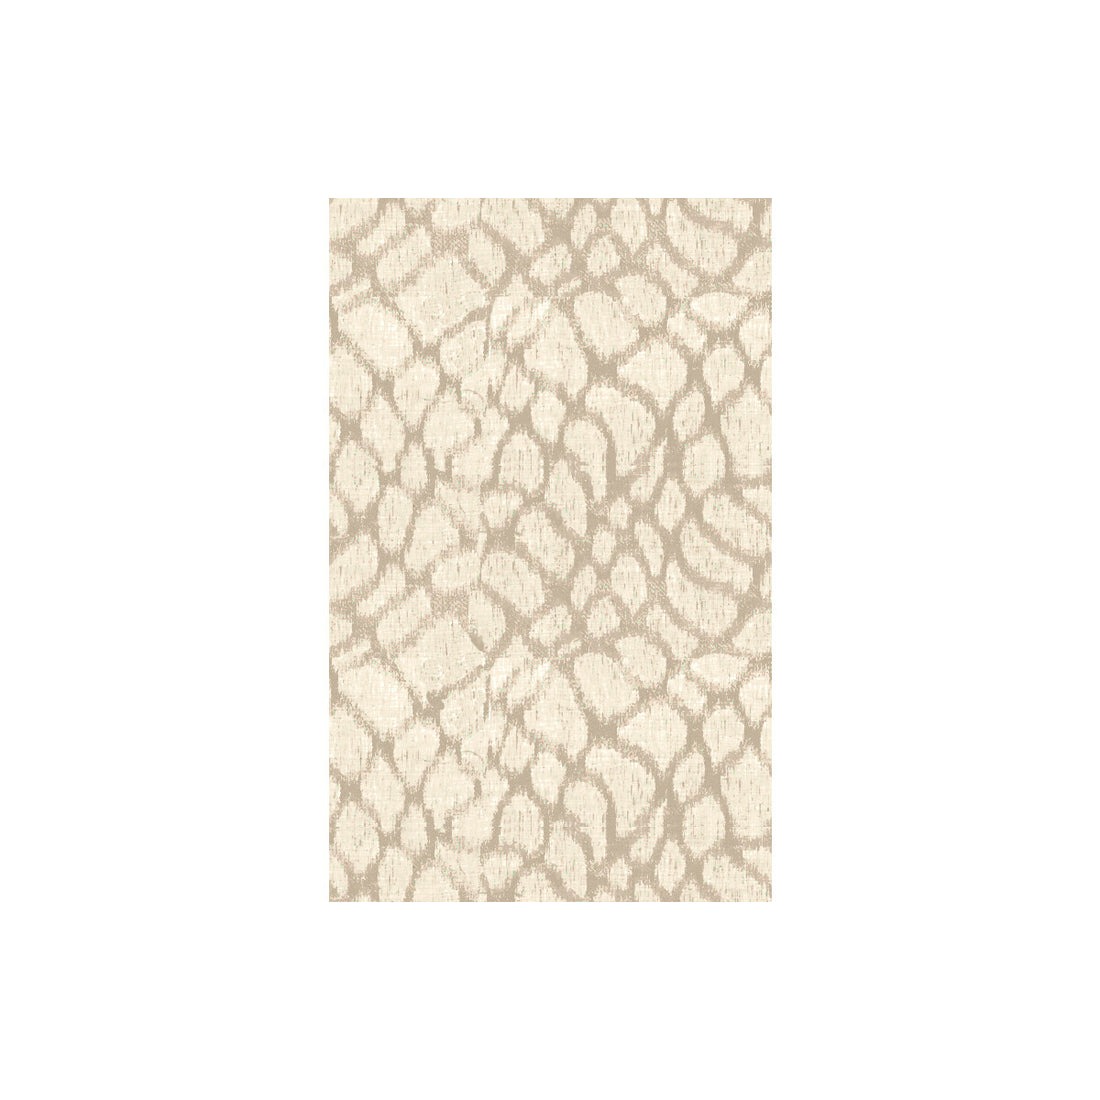 Anet fabric in sand color - pattern 3948.1116.0 - by Kravet Basics in the Jeffrey Alan Marks collection